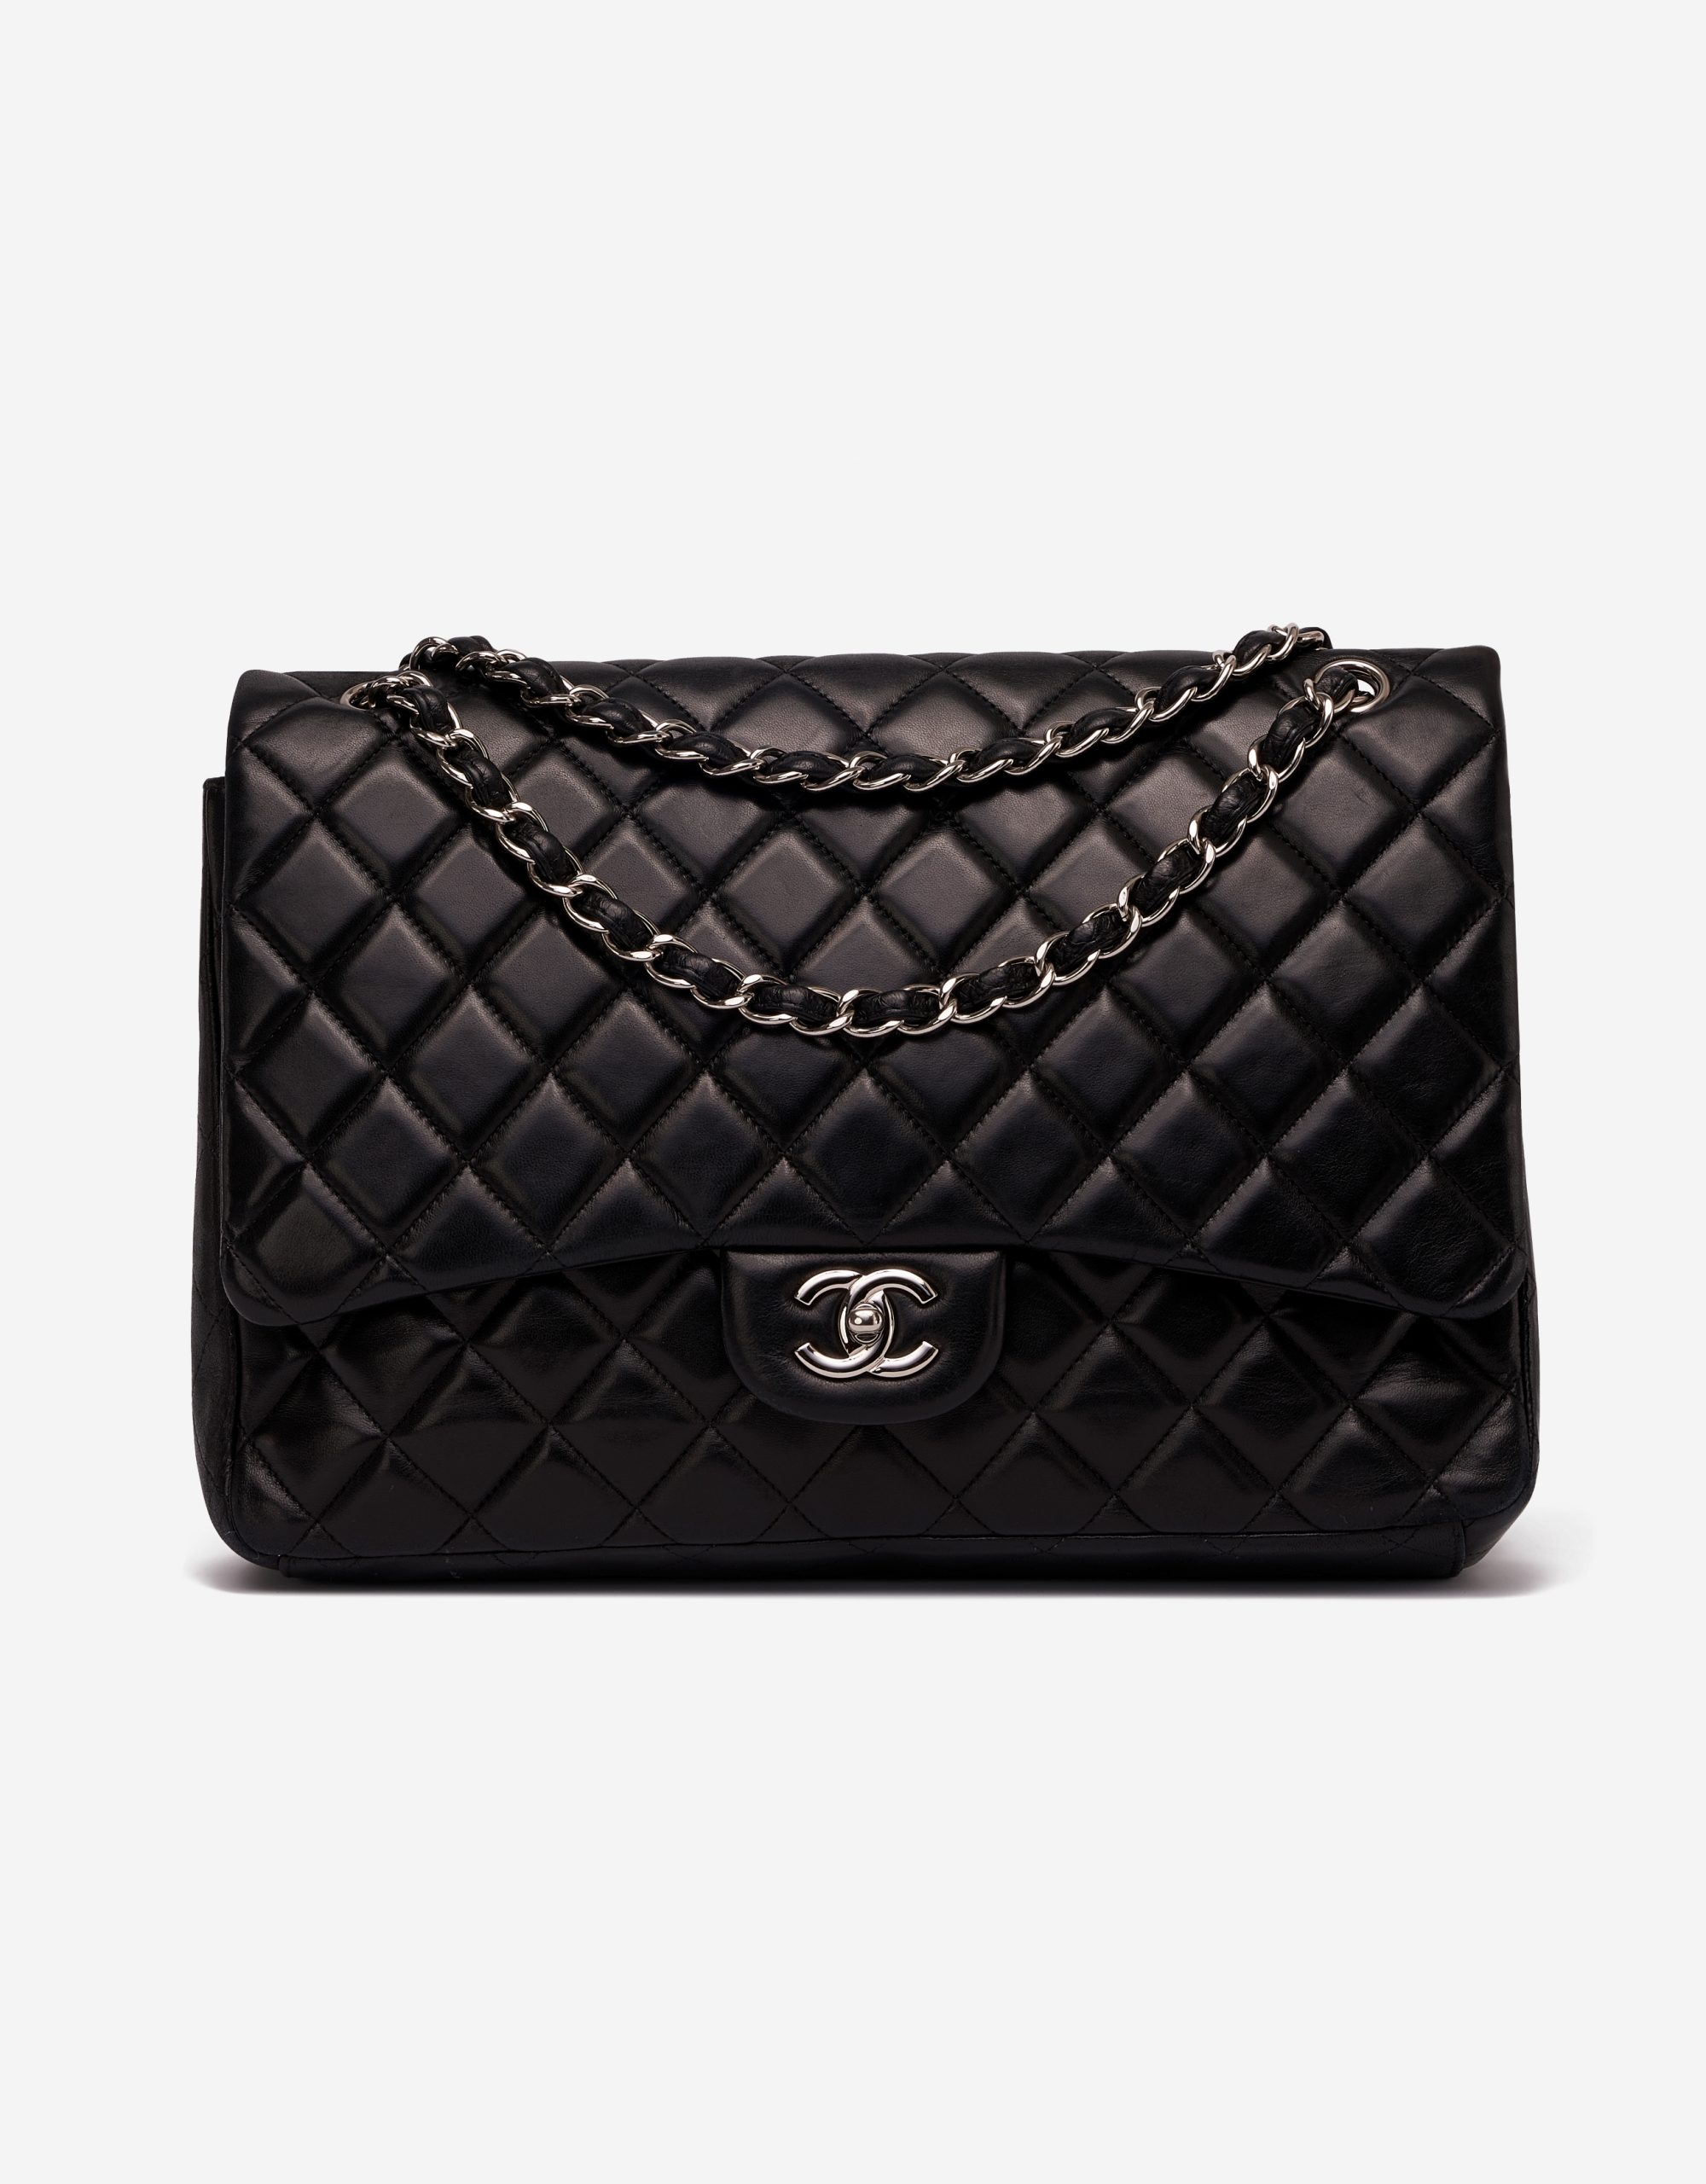 Chanel Classic Jumbo Single Flap Bag in Black Lambskin with Shiny Silver  Hardware - SOLD